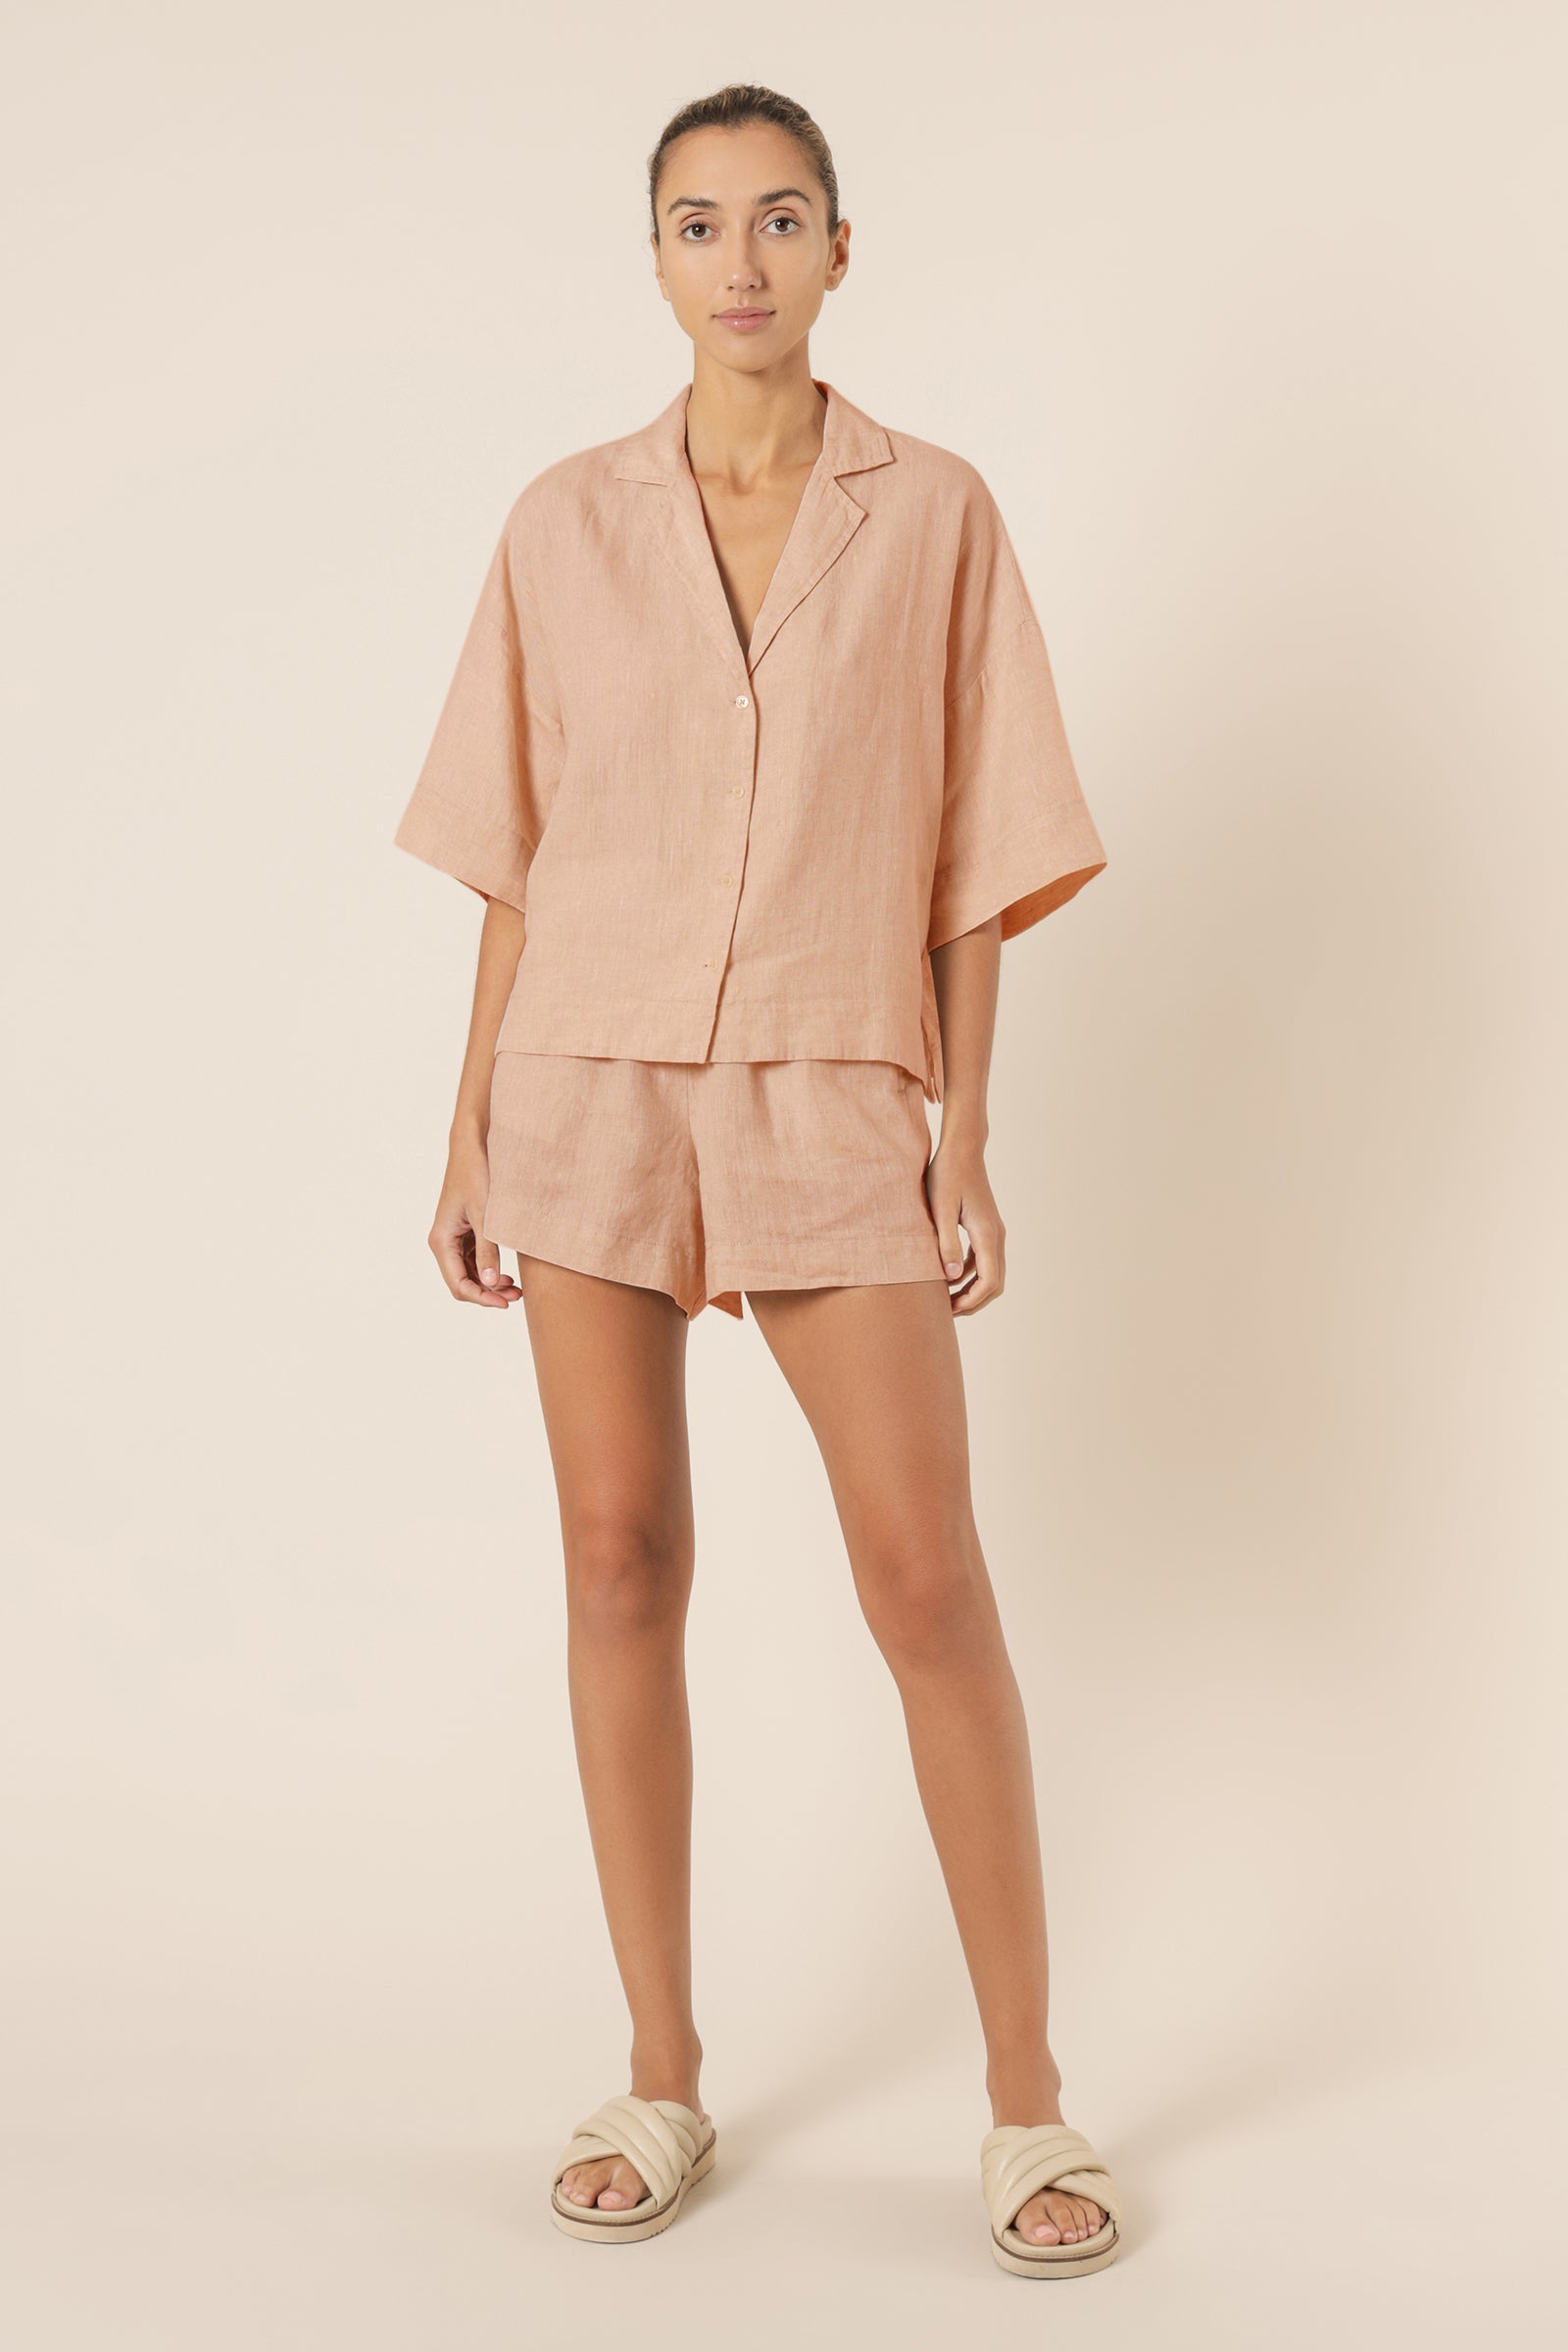 Nude Lucy nude lounge linen short clay shorts